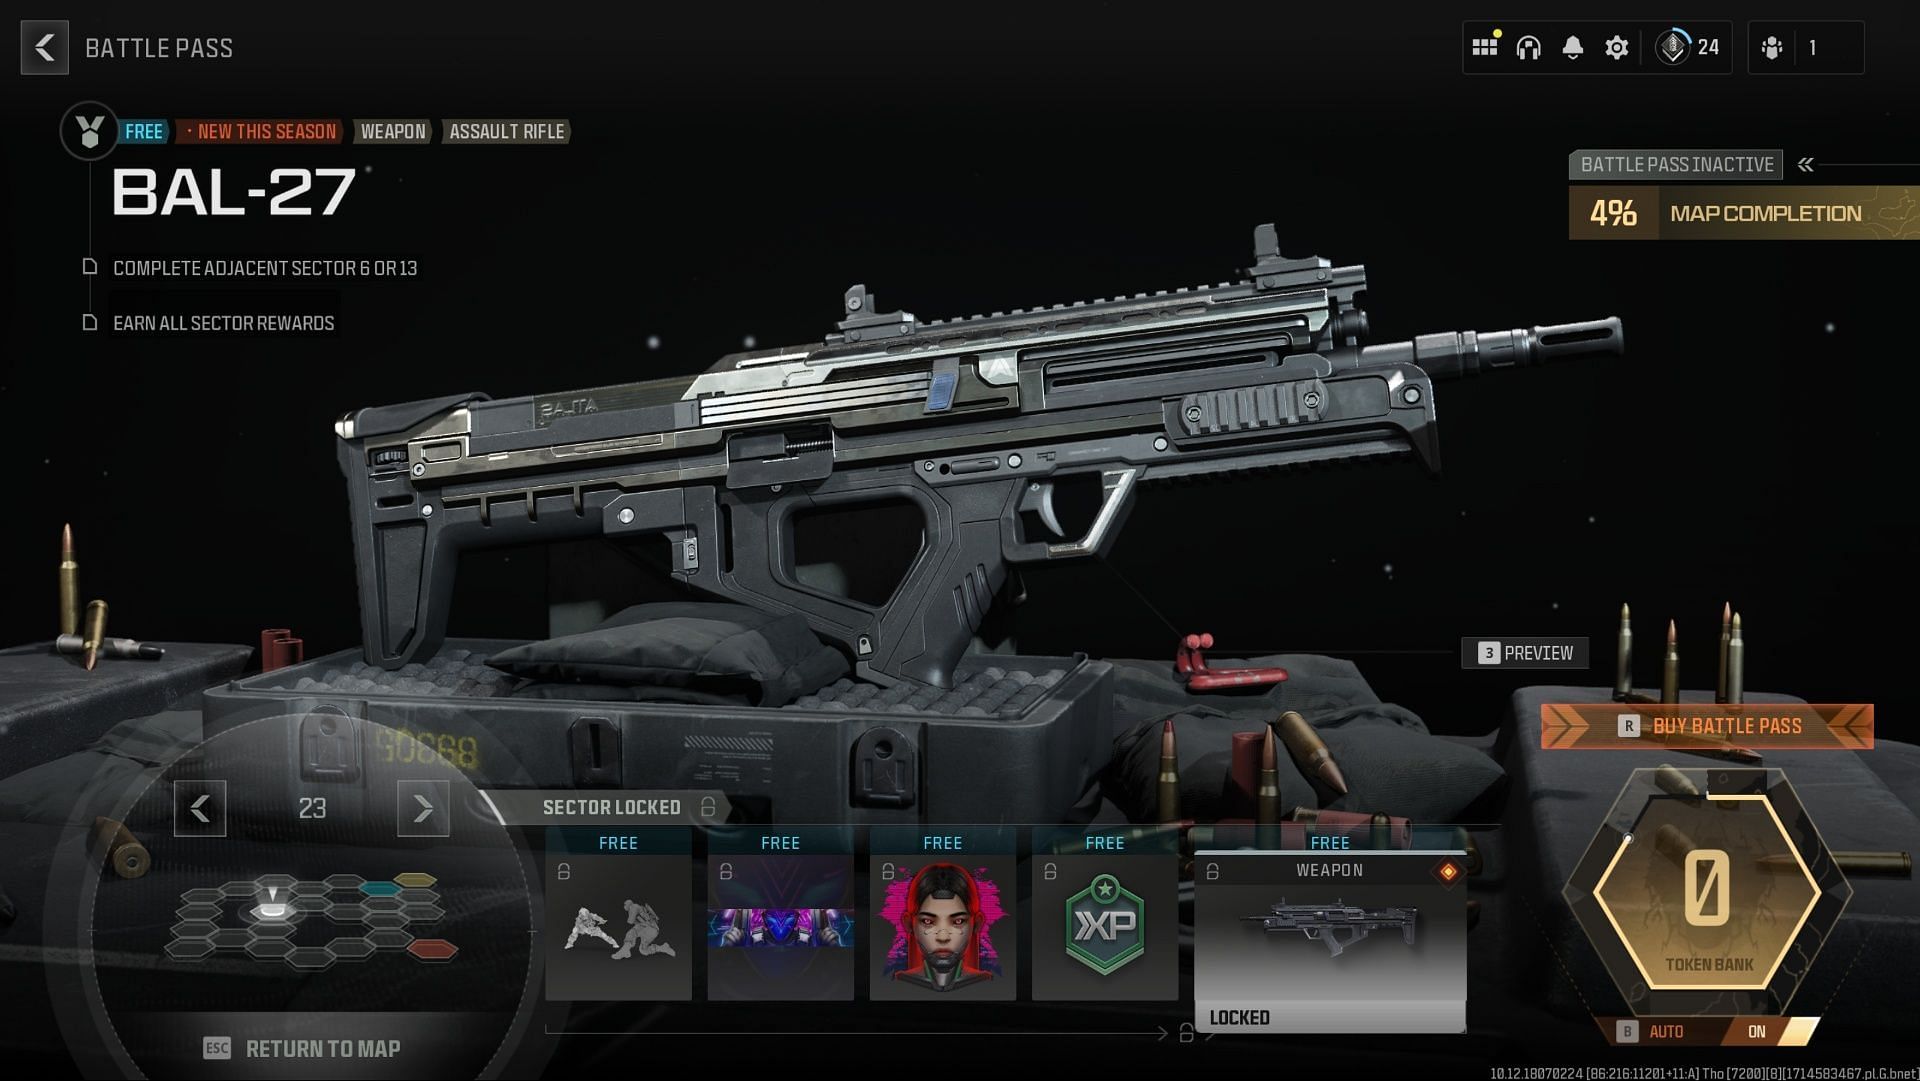 Unlocking BAL 27 via Battle Pass sector 23 in Warzone and MW3 (image via Activision)